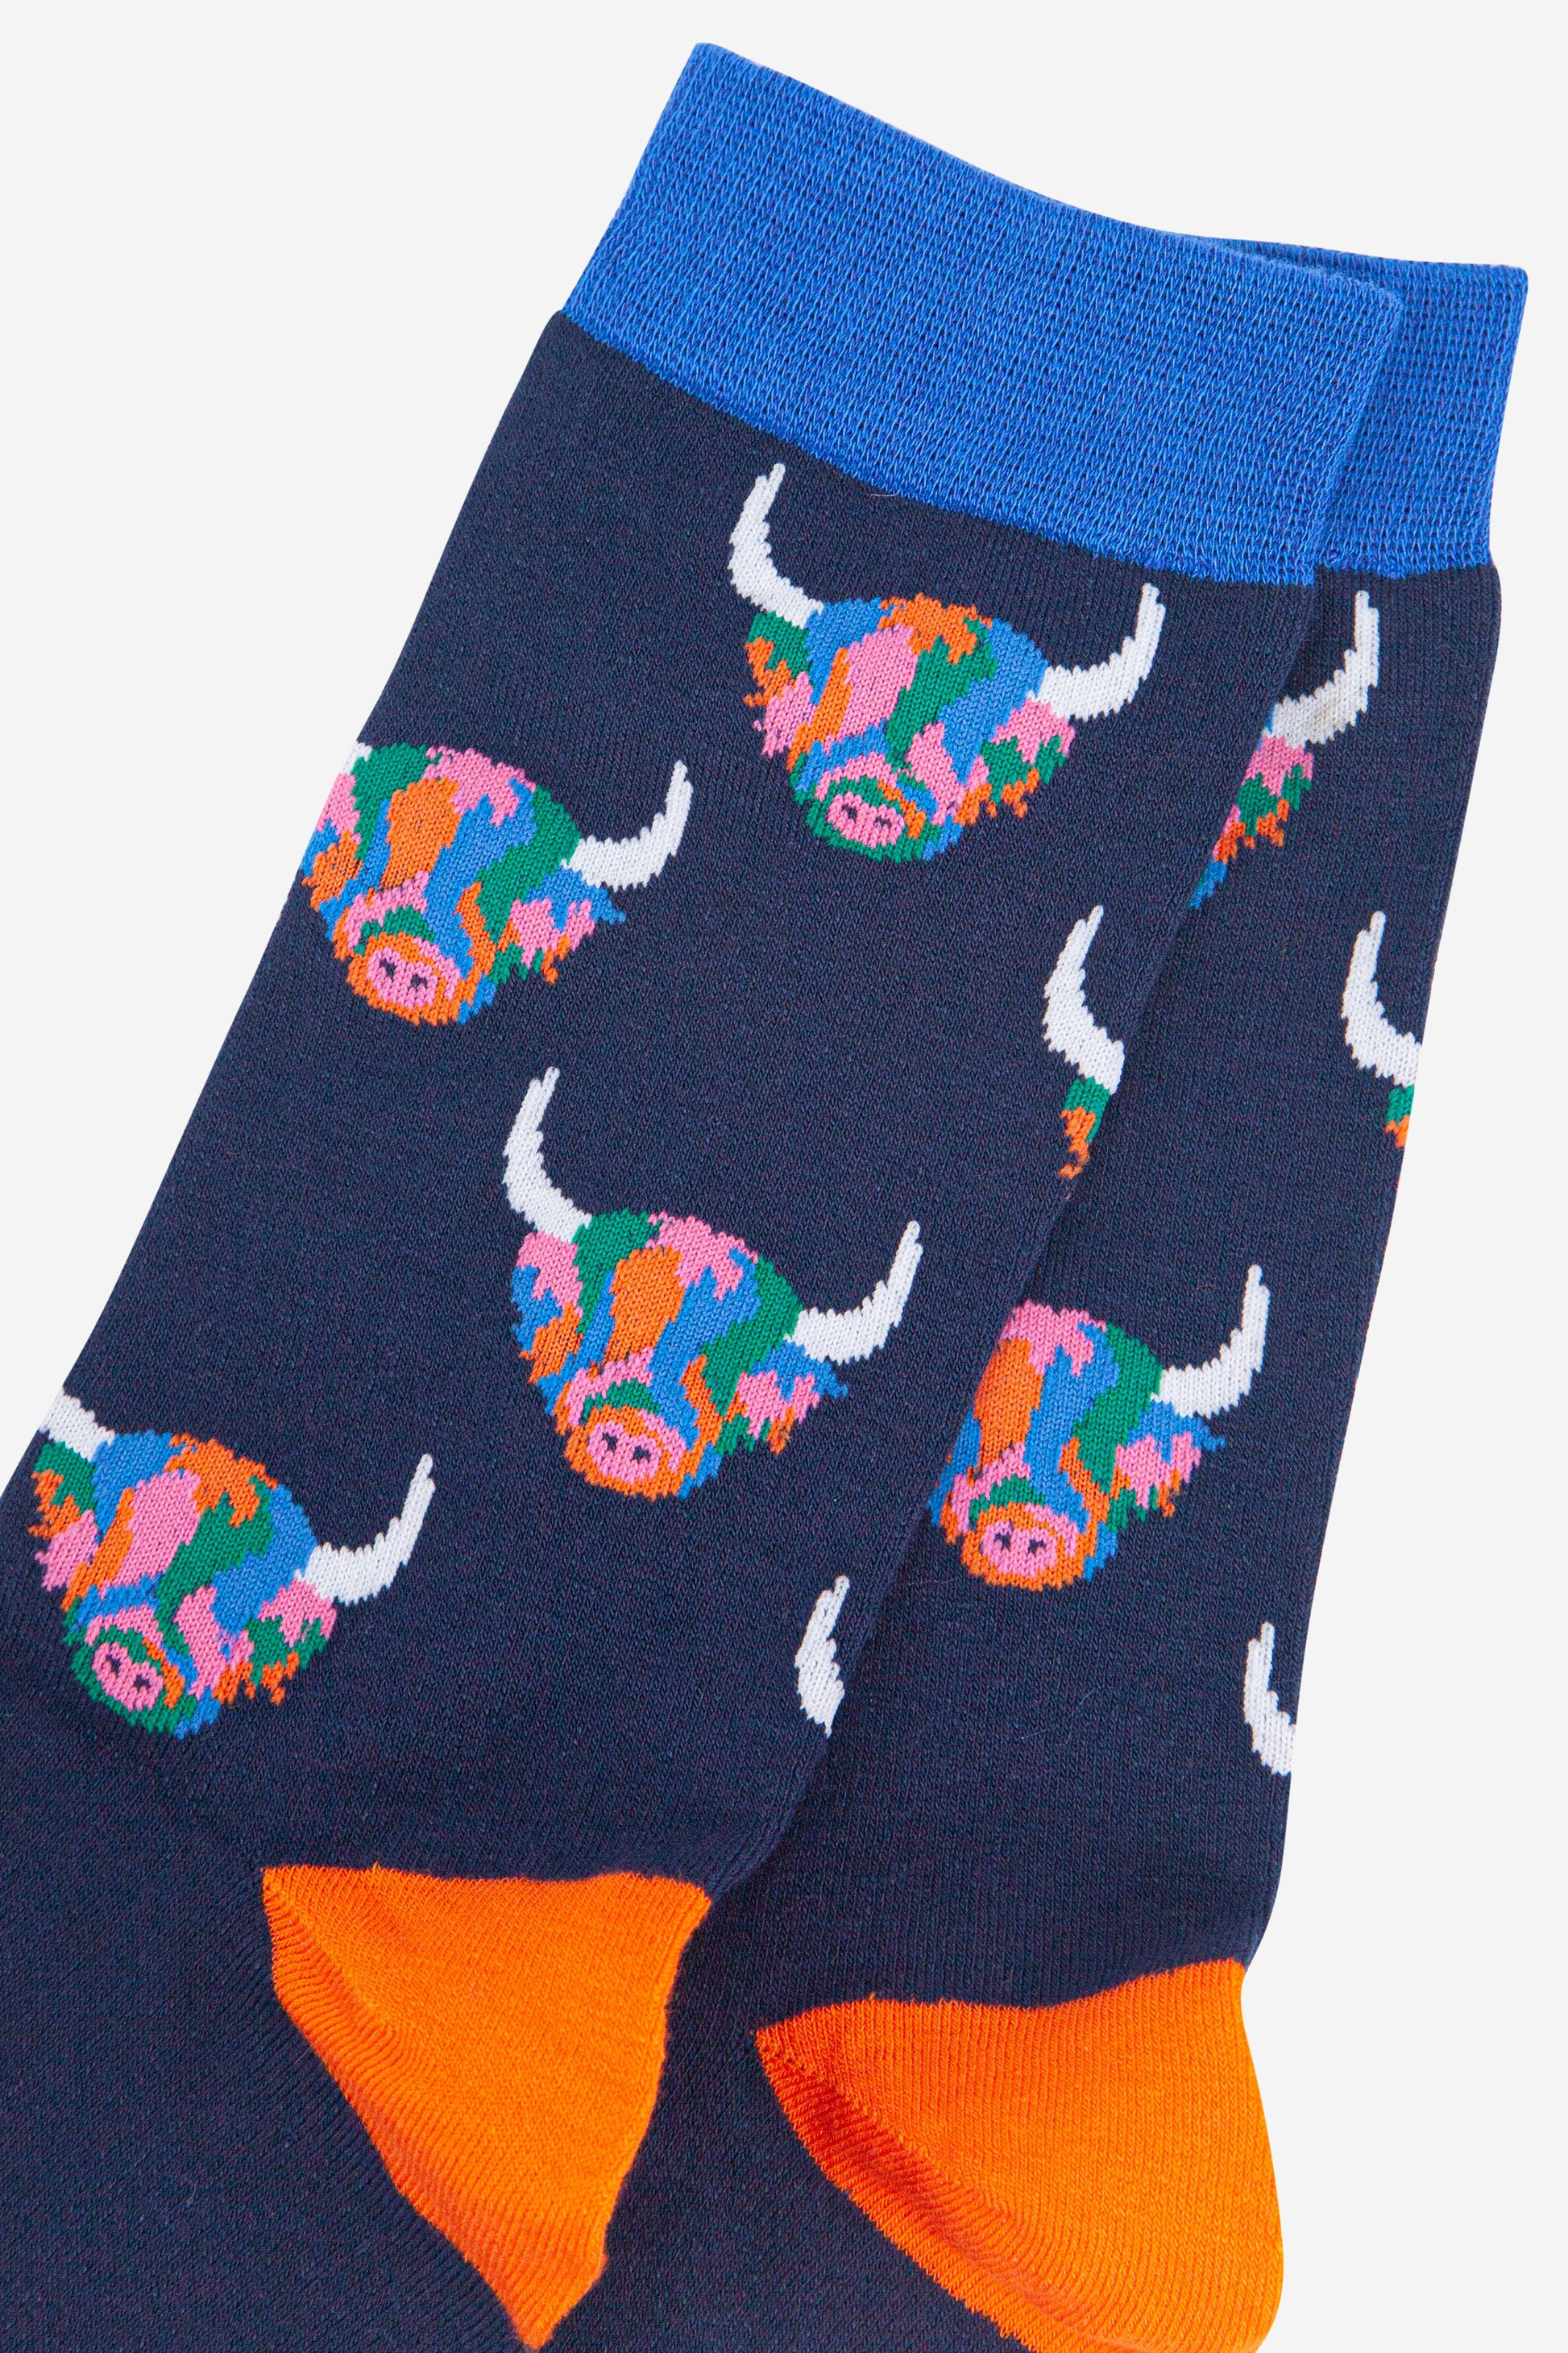 mens navy blue bamboo socks with an all over pattern of rainbow coloured highland cows